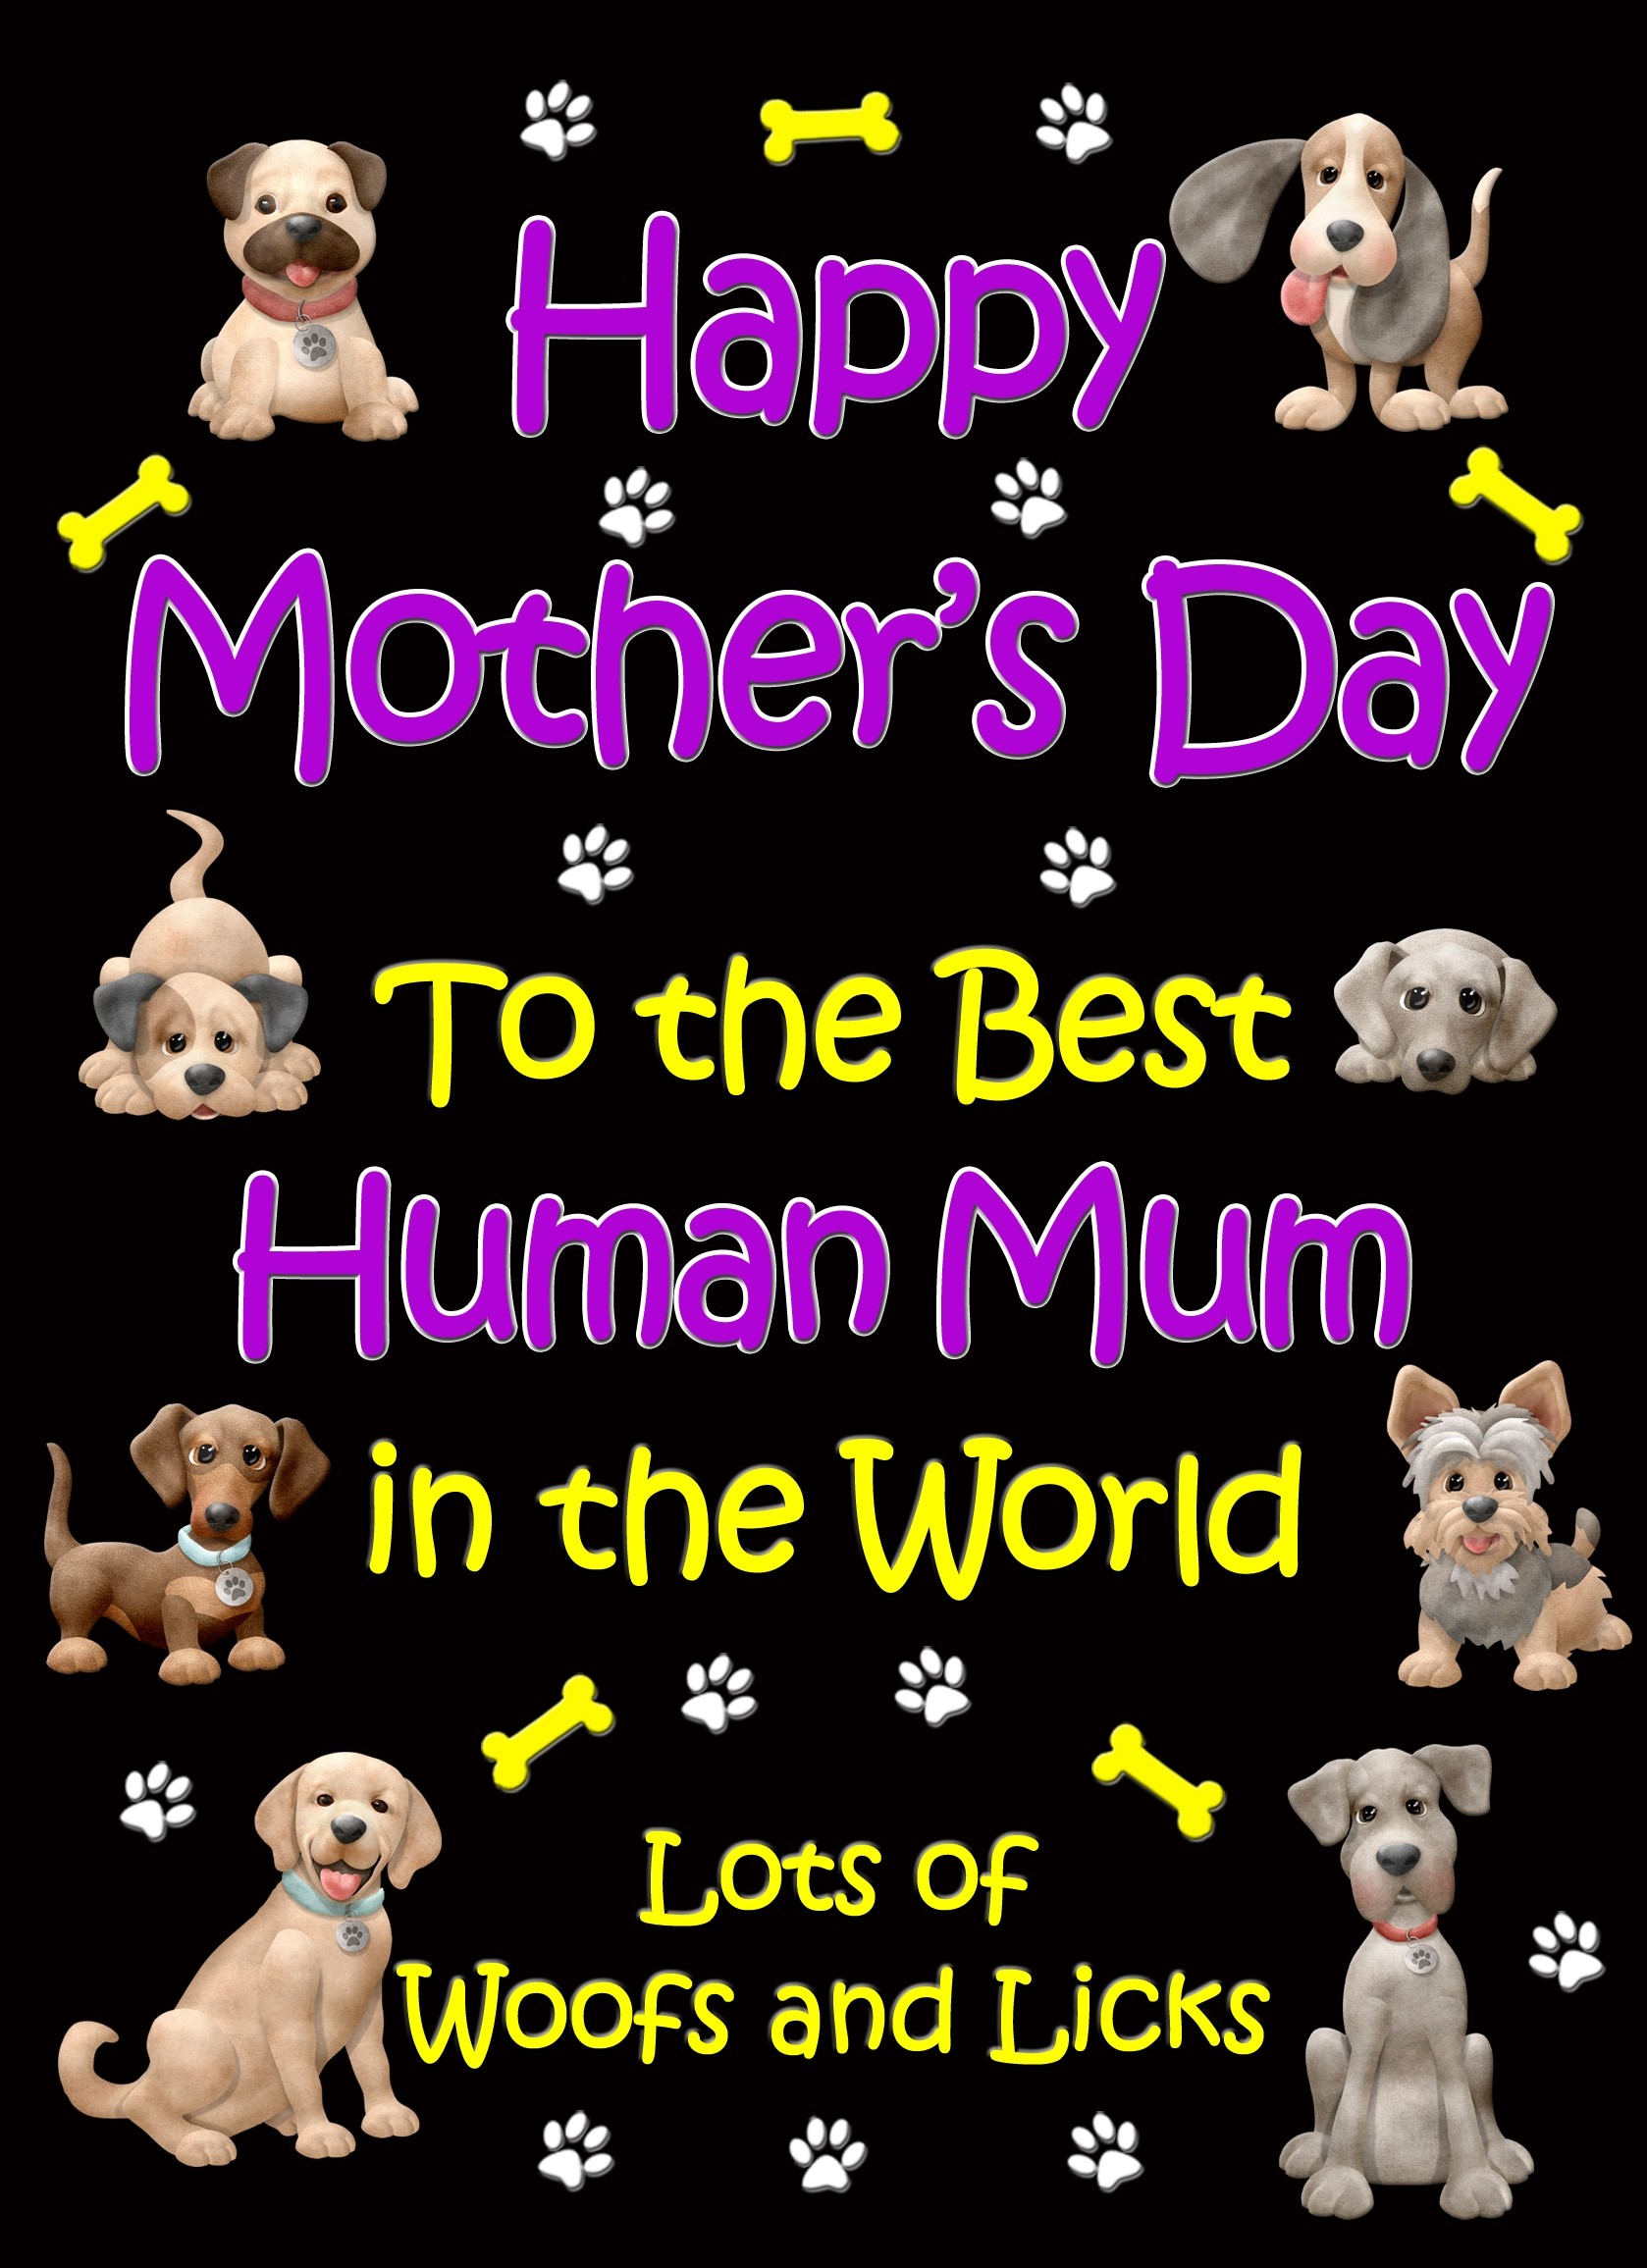 From The Dog Happy Mothers Day Card (Black, Human Mum)